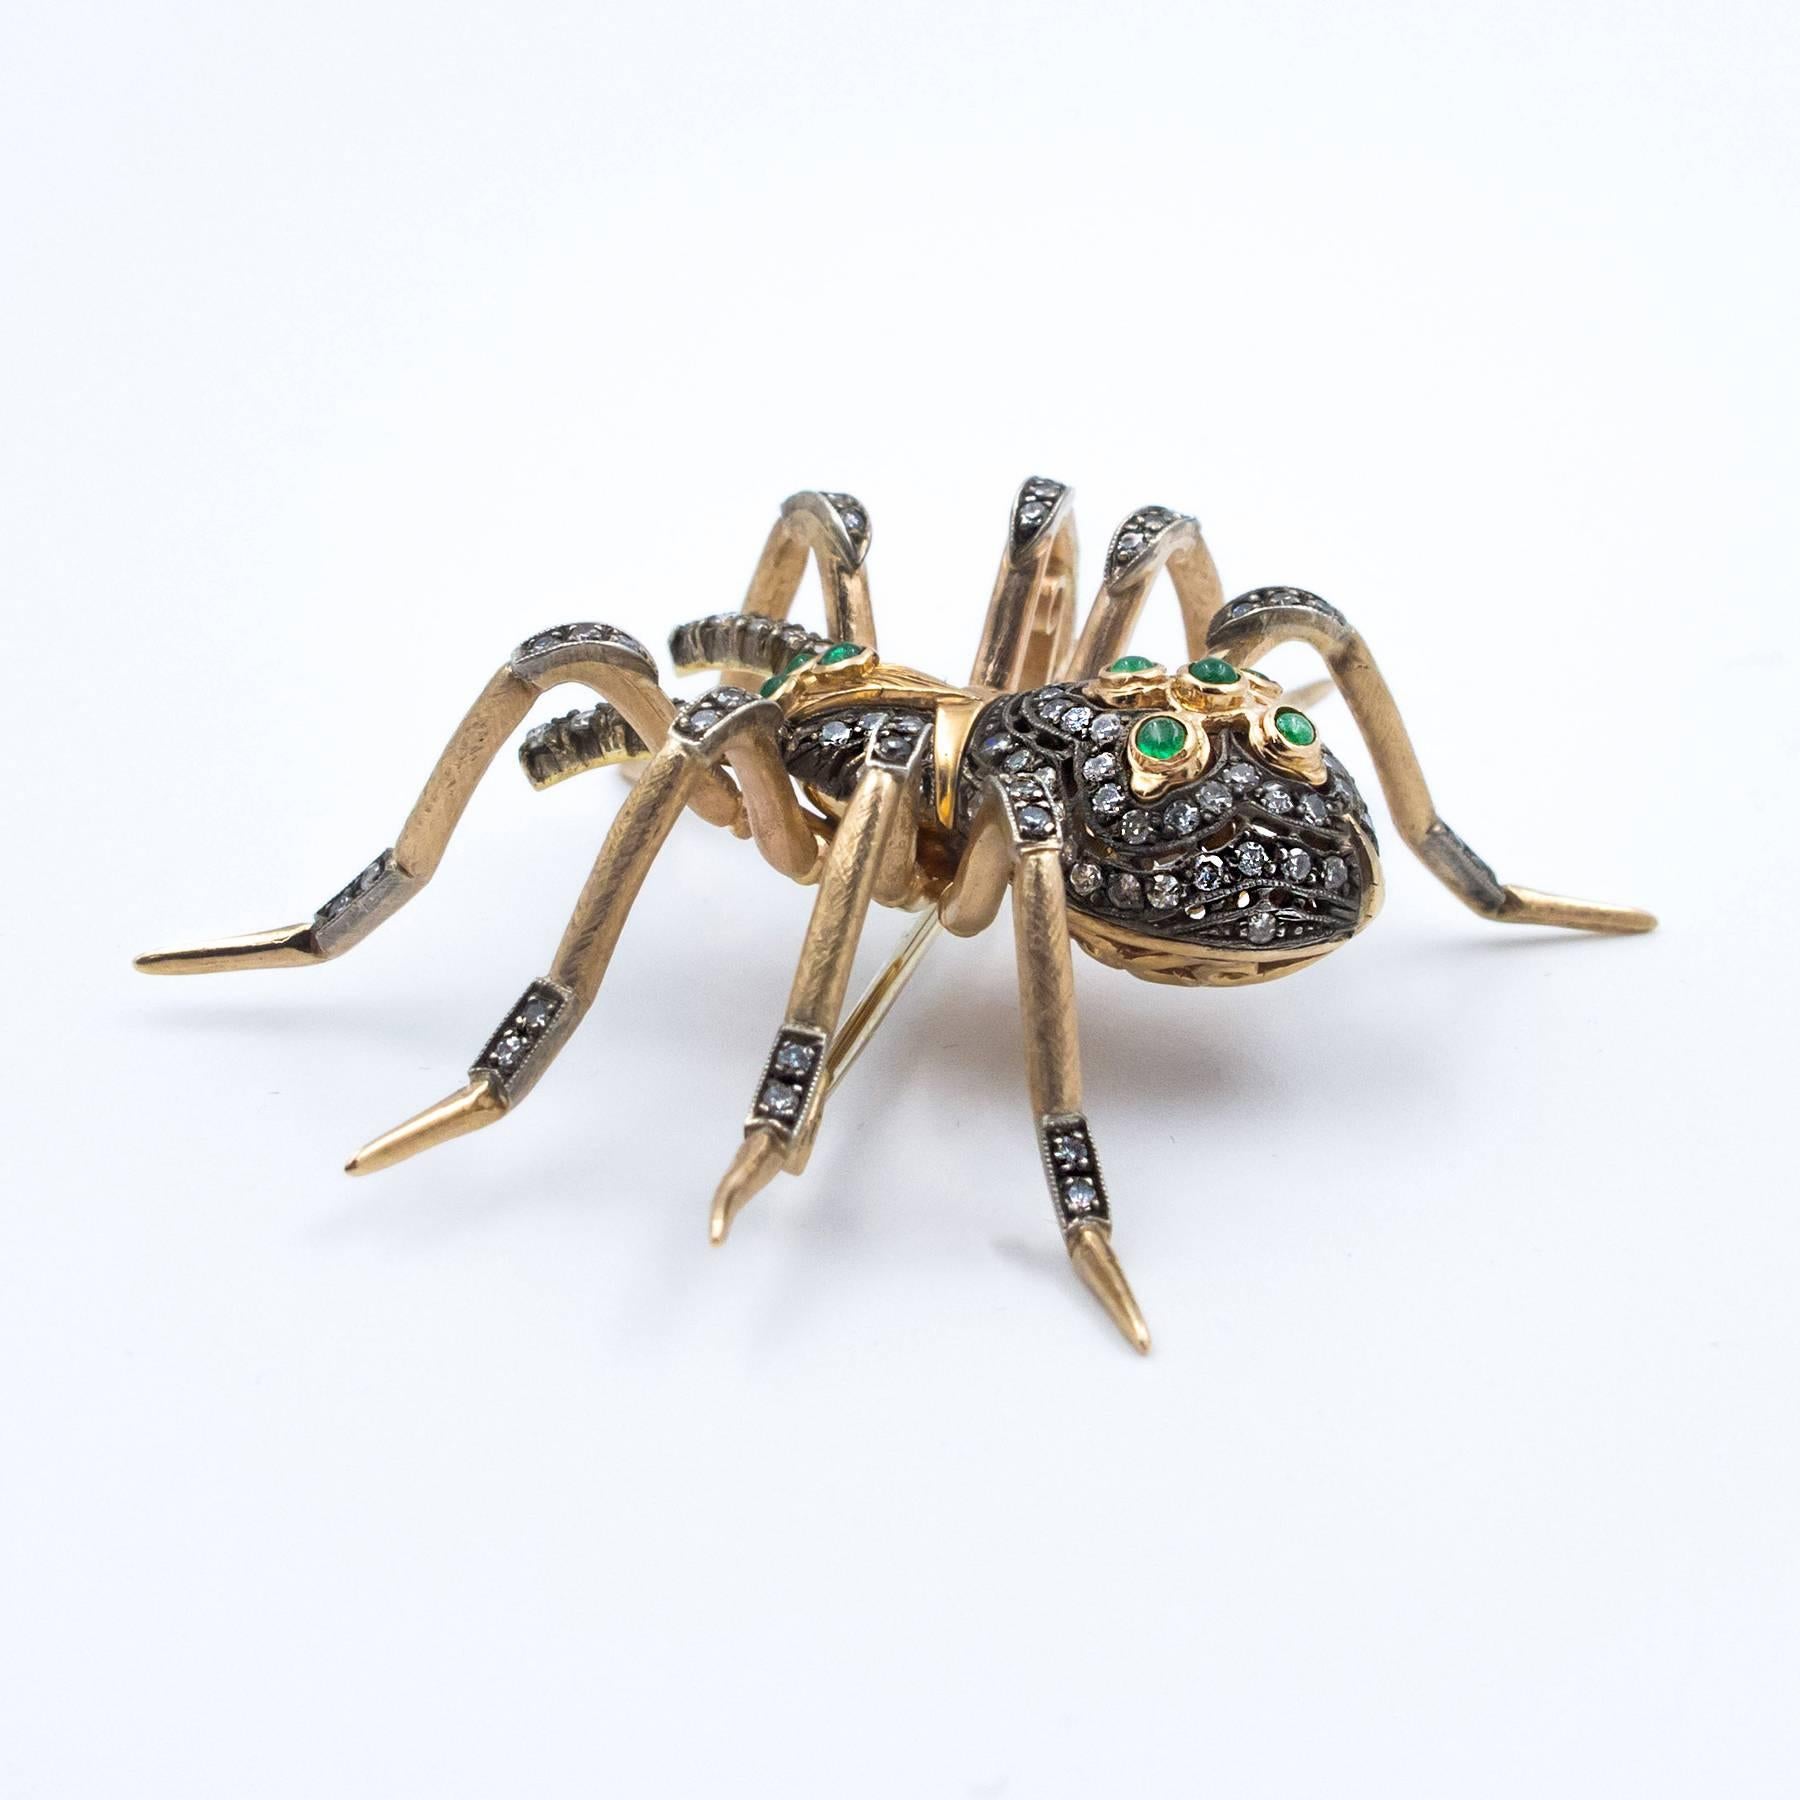 A handcrafted Diamond and Emerald Brooch in the form of a Spider. Set with 179 Diamonds and Emeralds in 14 Karat Pink/Yellow hand rubbed and textured gold.

Beautifully detailed, this is a large and impressive pin, remaining very wearable at 2.50